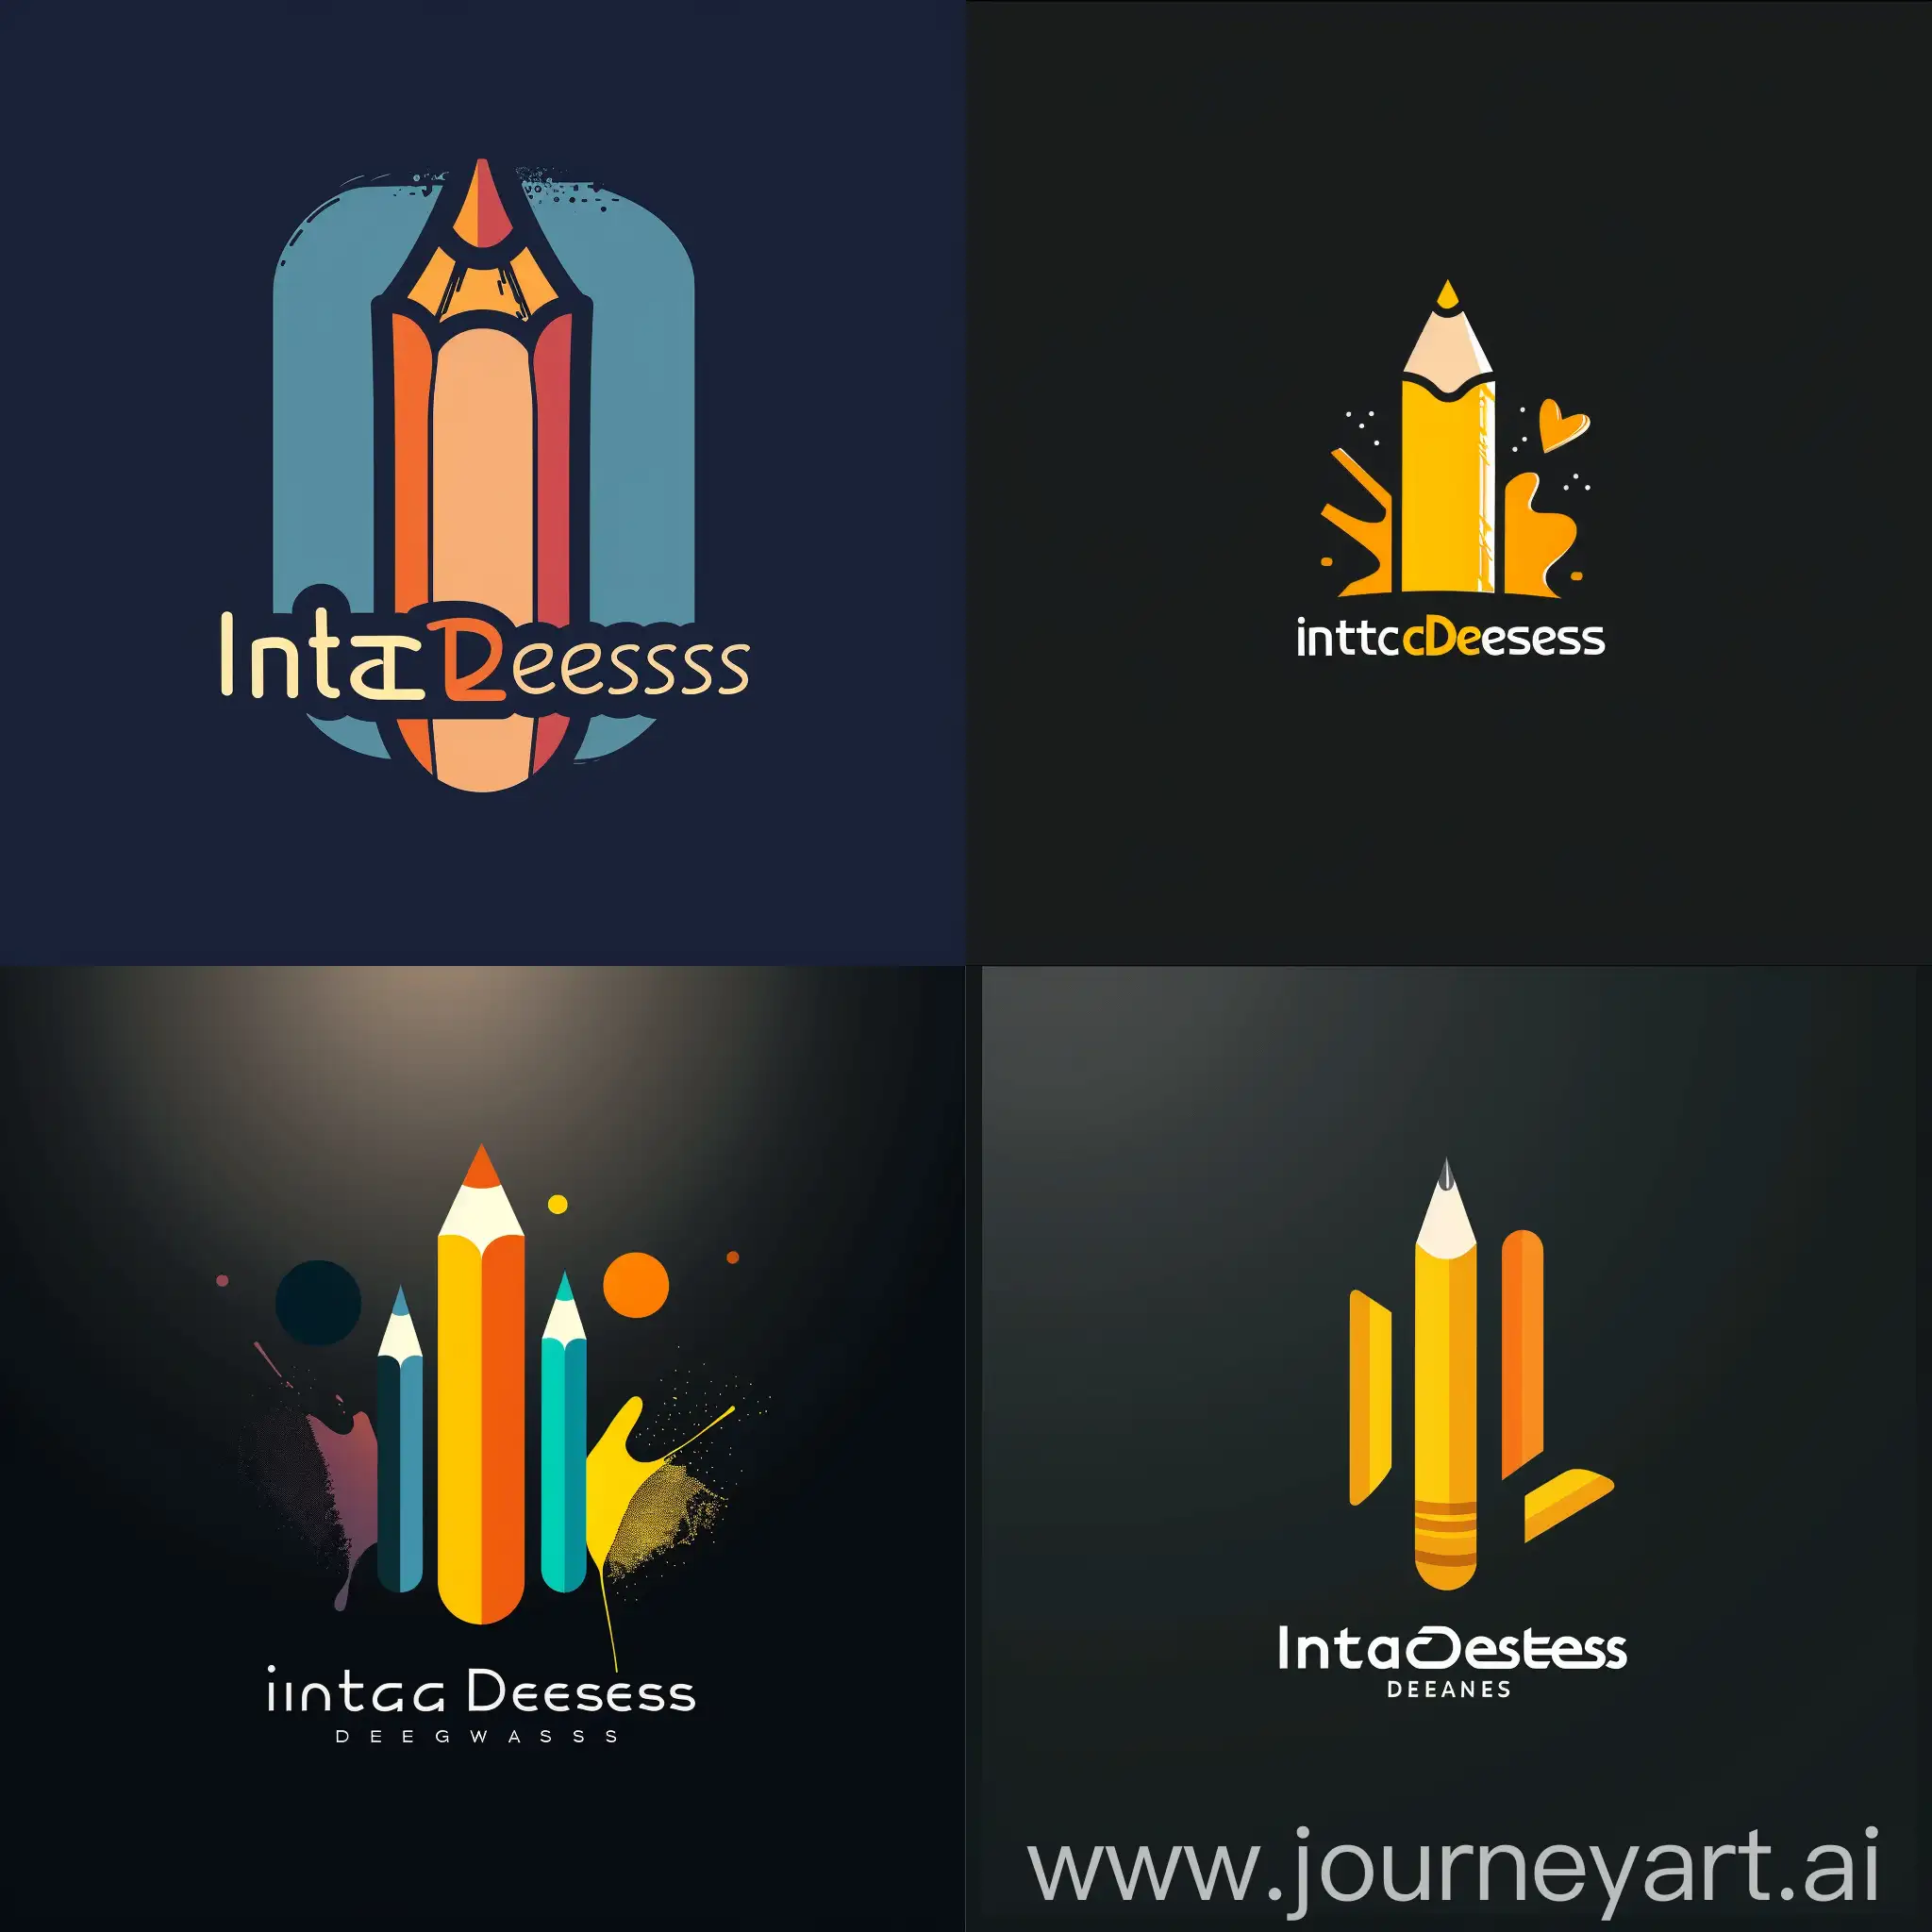  A minimal logo with Incorporating the company name "InstaDesigns" prominently  with design-related elements such as a pencil, brush,  to convey the idea of creativity and design.